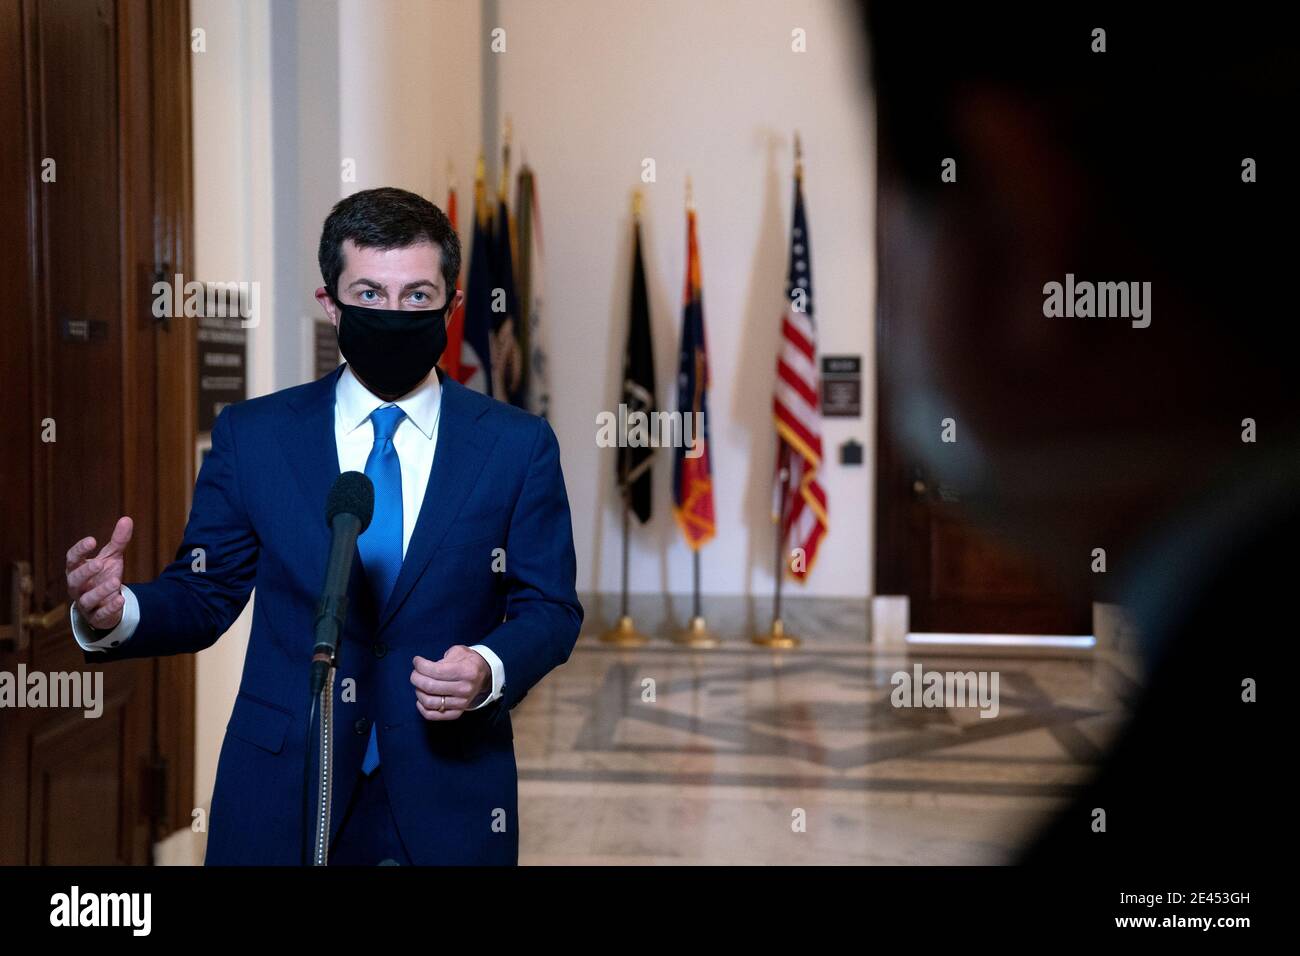 Pete Buttigieg, U.S. secretary of transportation nominee for U.S. President Joe Biden, wears a protective mask while speaking to members of the media after a Senate Commerce, Science and Transportation Committee confirmation hearing in Washington, DC, U.S., on Thursday, Jan. 21, 2021. Buttigieg, is pledging to carry out the administration's ambitious agenda to rebuild the nation's infrastructure, calling it a 'generational opportunity' to create new jobs, fight economic inequality and stem climate change. Credit: Stefani Reynolds/Pool via CNP | usage worldwide Stock Photo